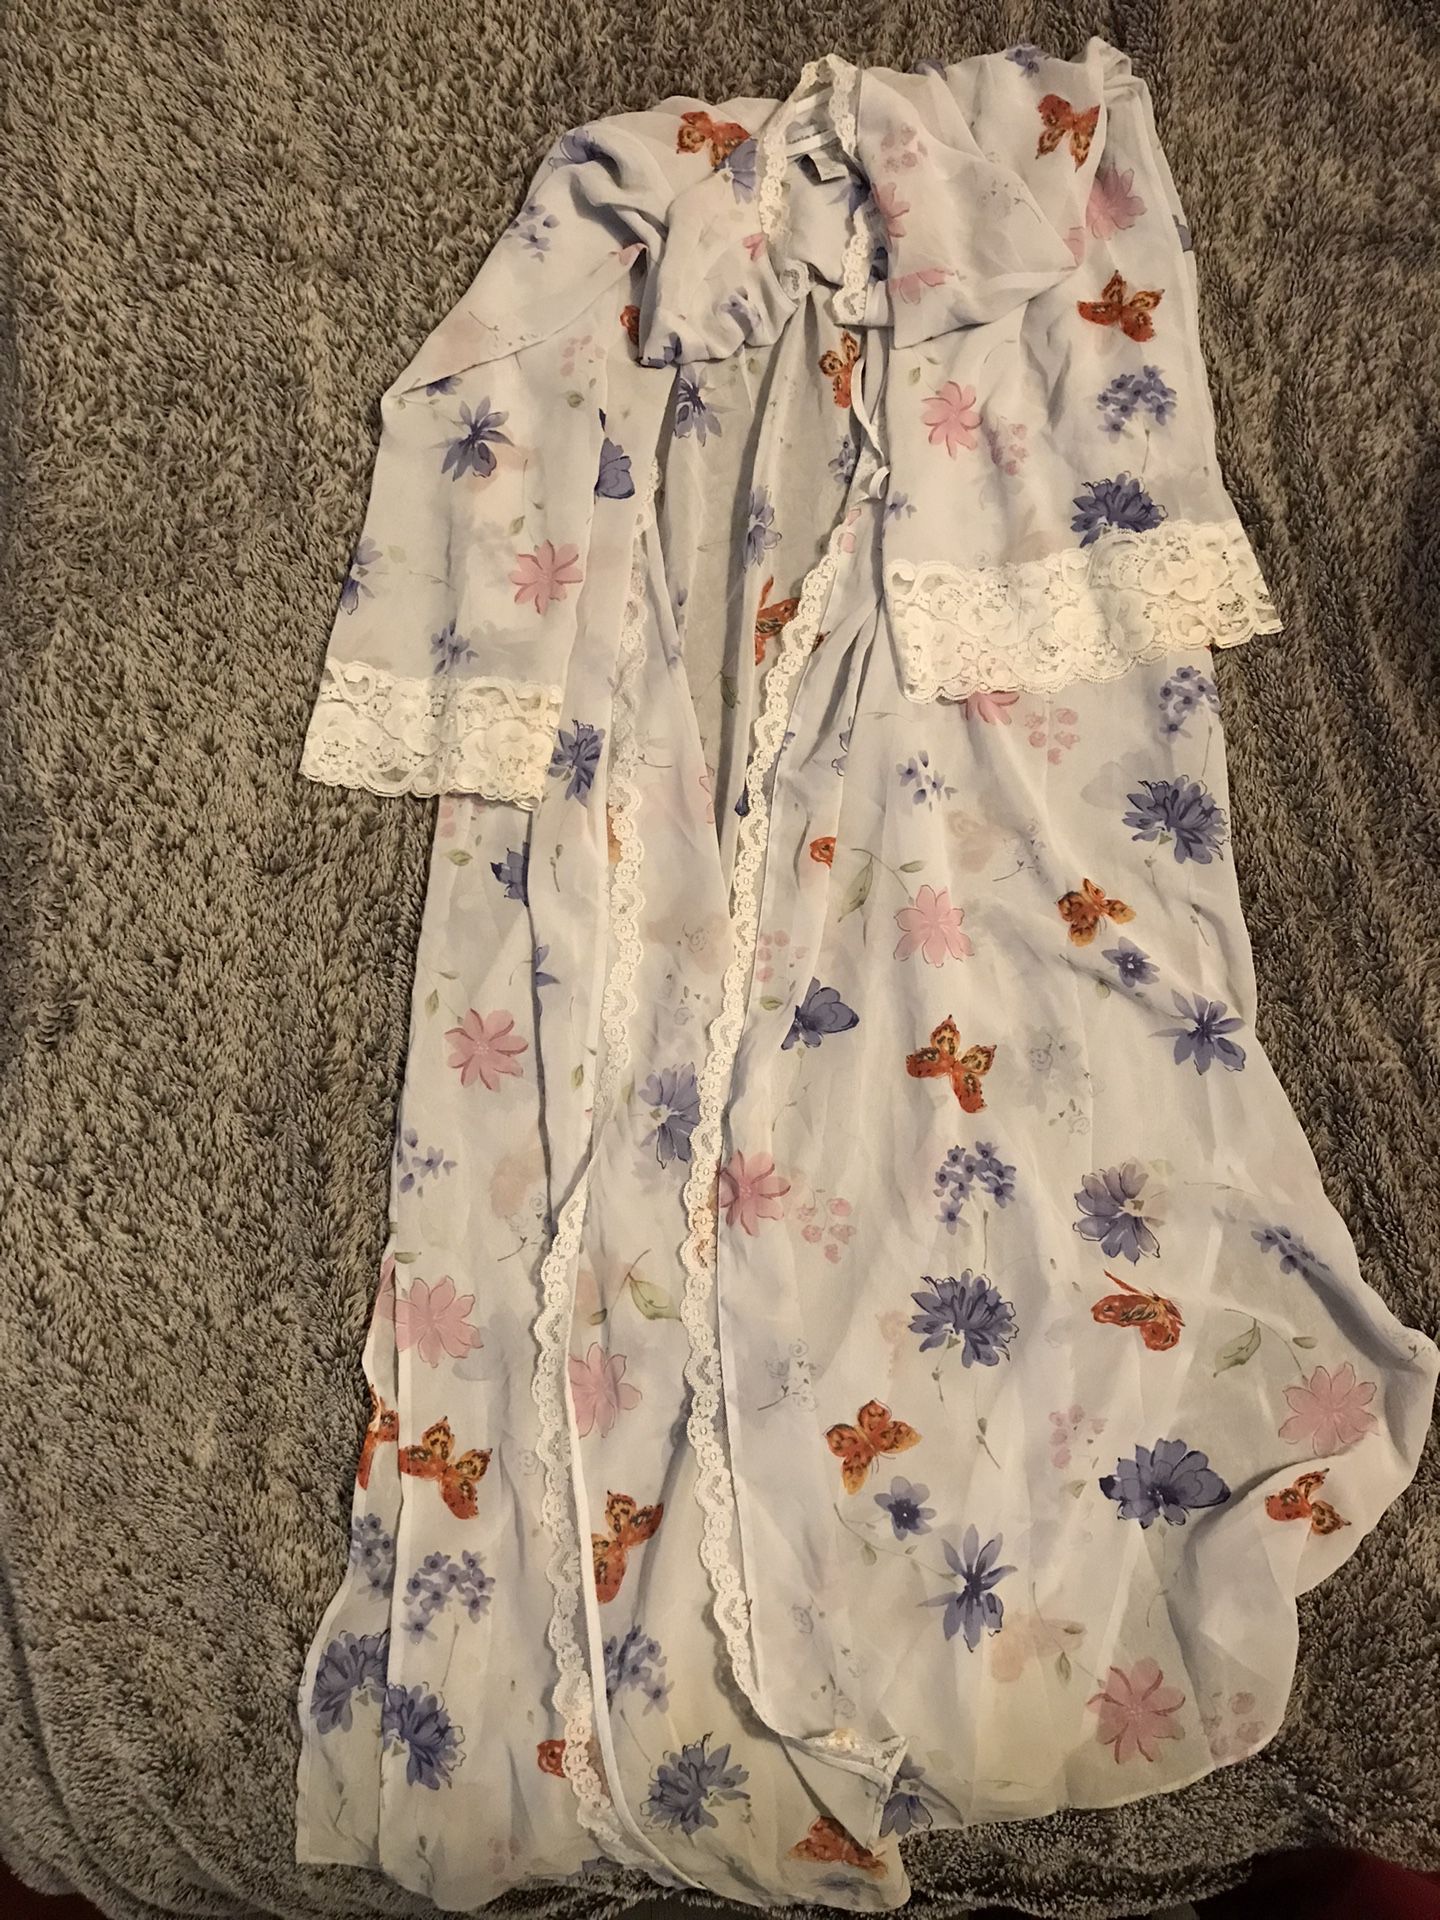 Blue Sheer Butterfly Night Gown/robe 